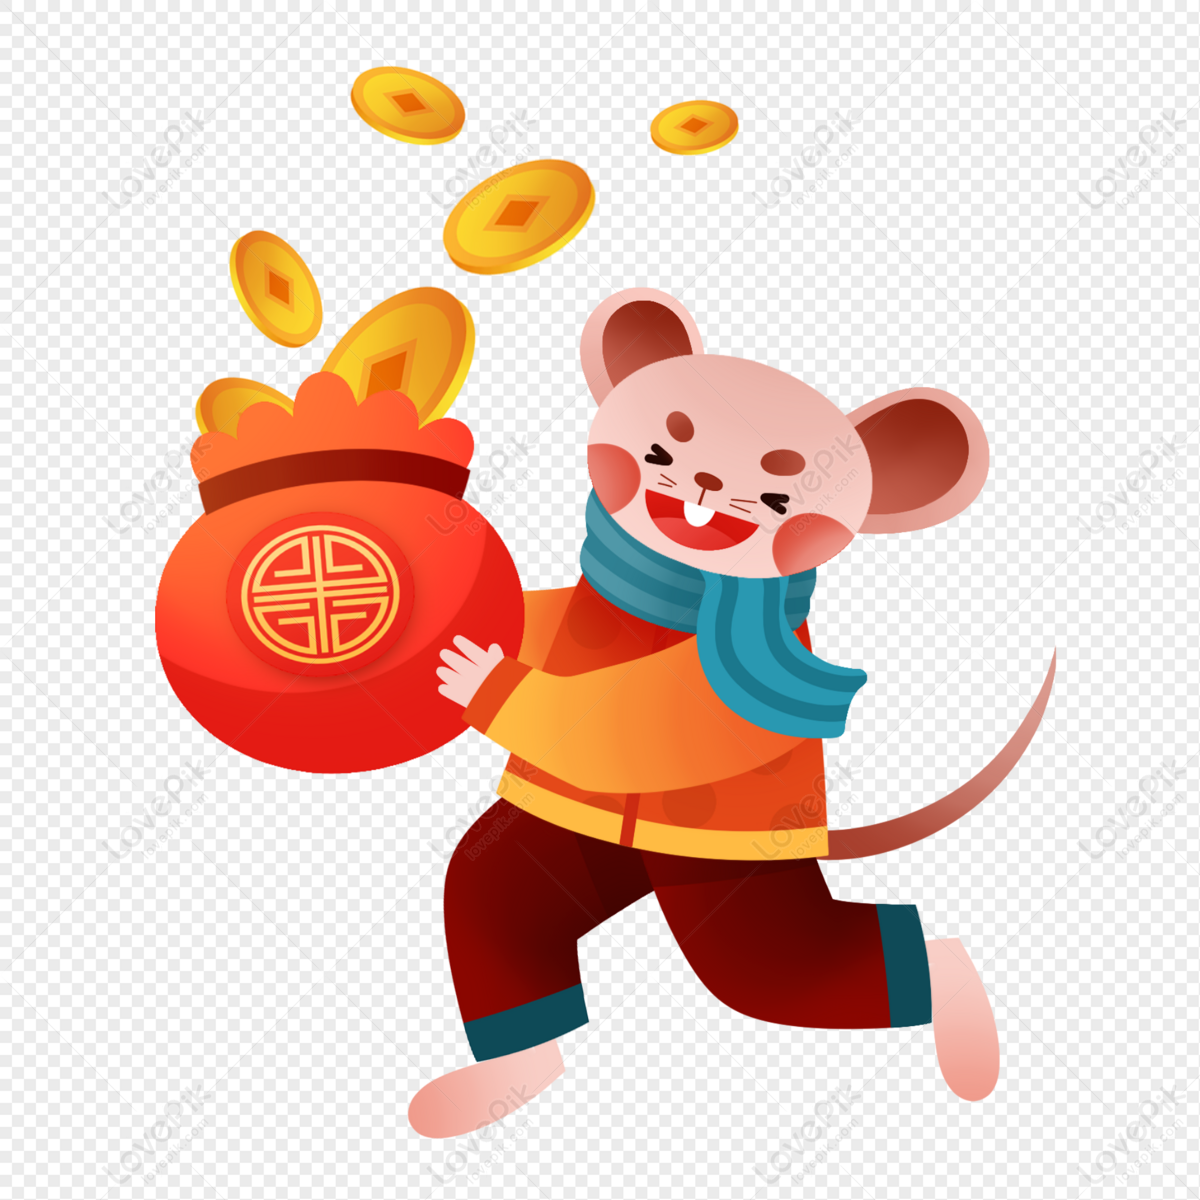 Cartoon Lucky Rat PNG Image Free Download And Clipart Image For Free  Download - Lovepik | 401671701